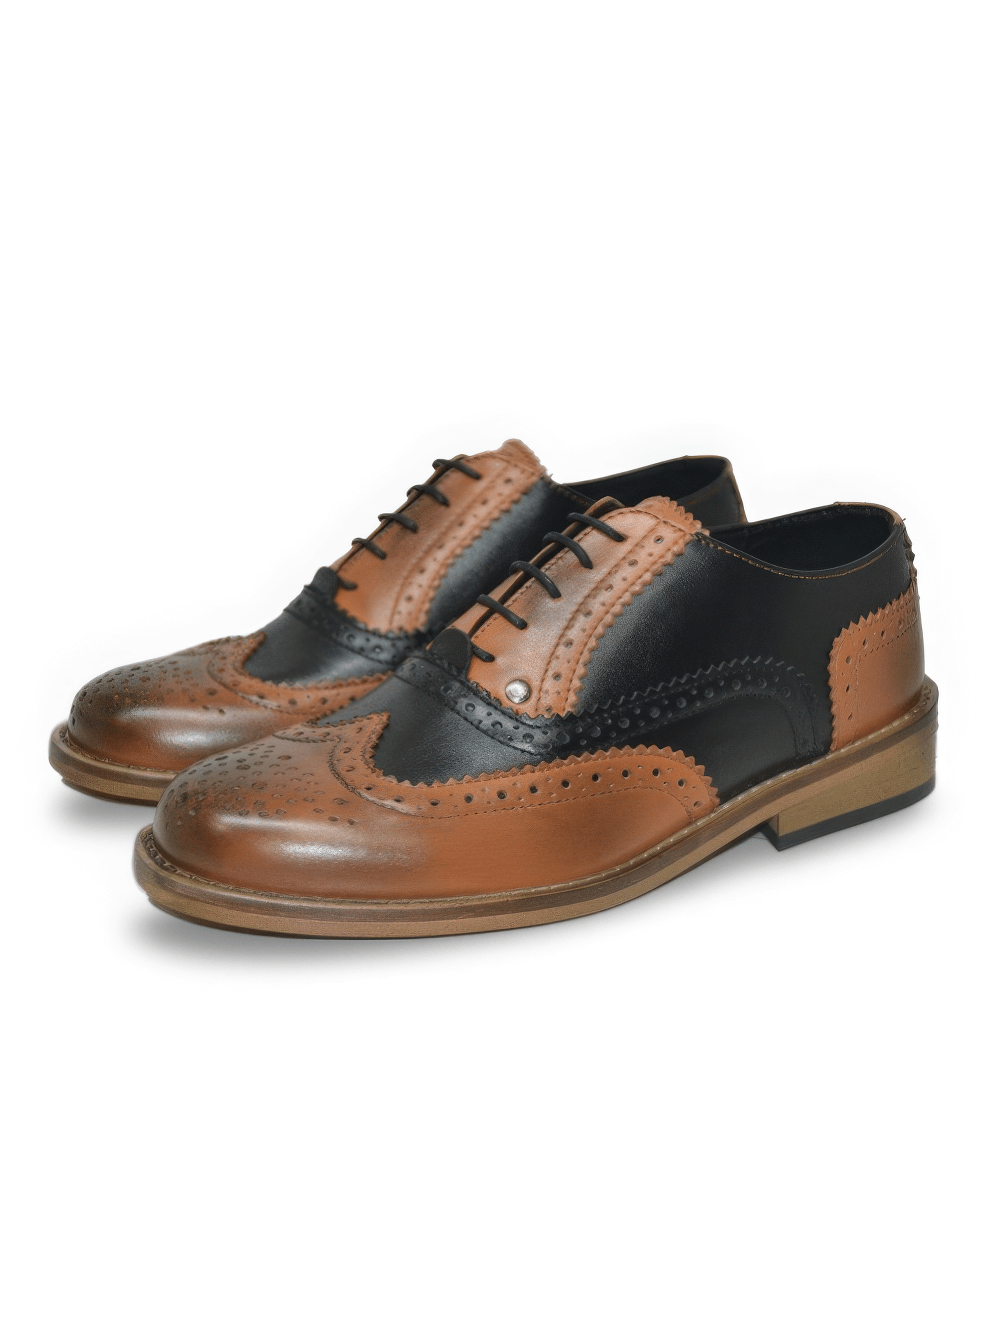 Lace-Up Oxford Shoes in Brown and Black Leather